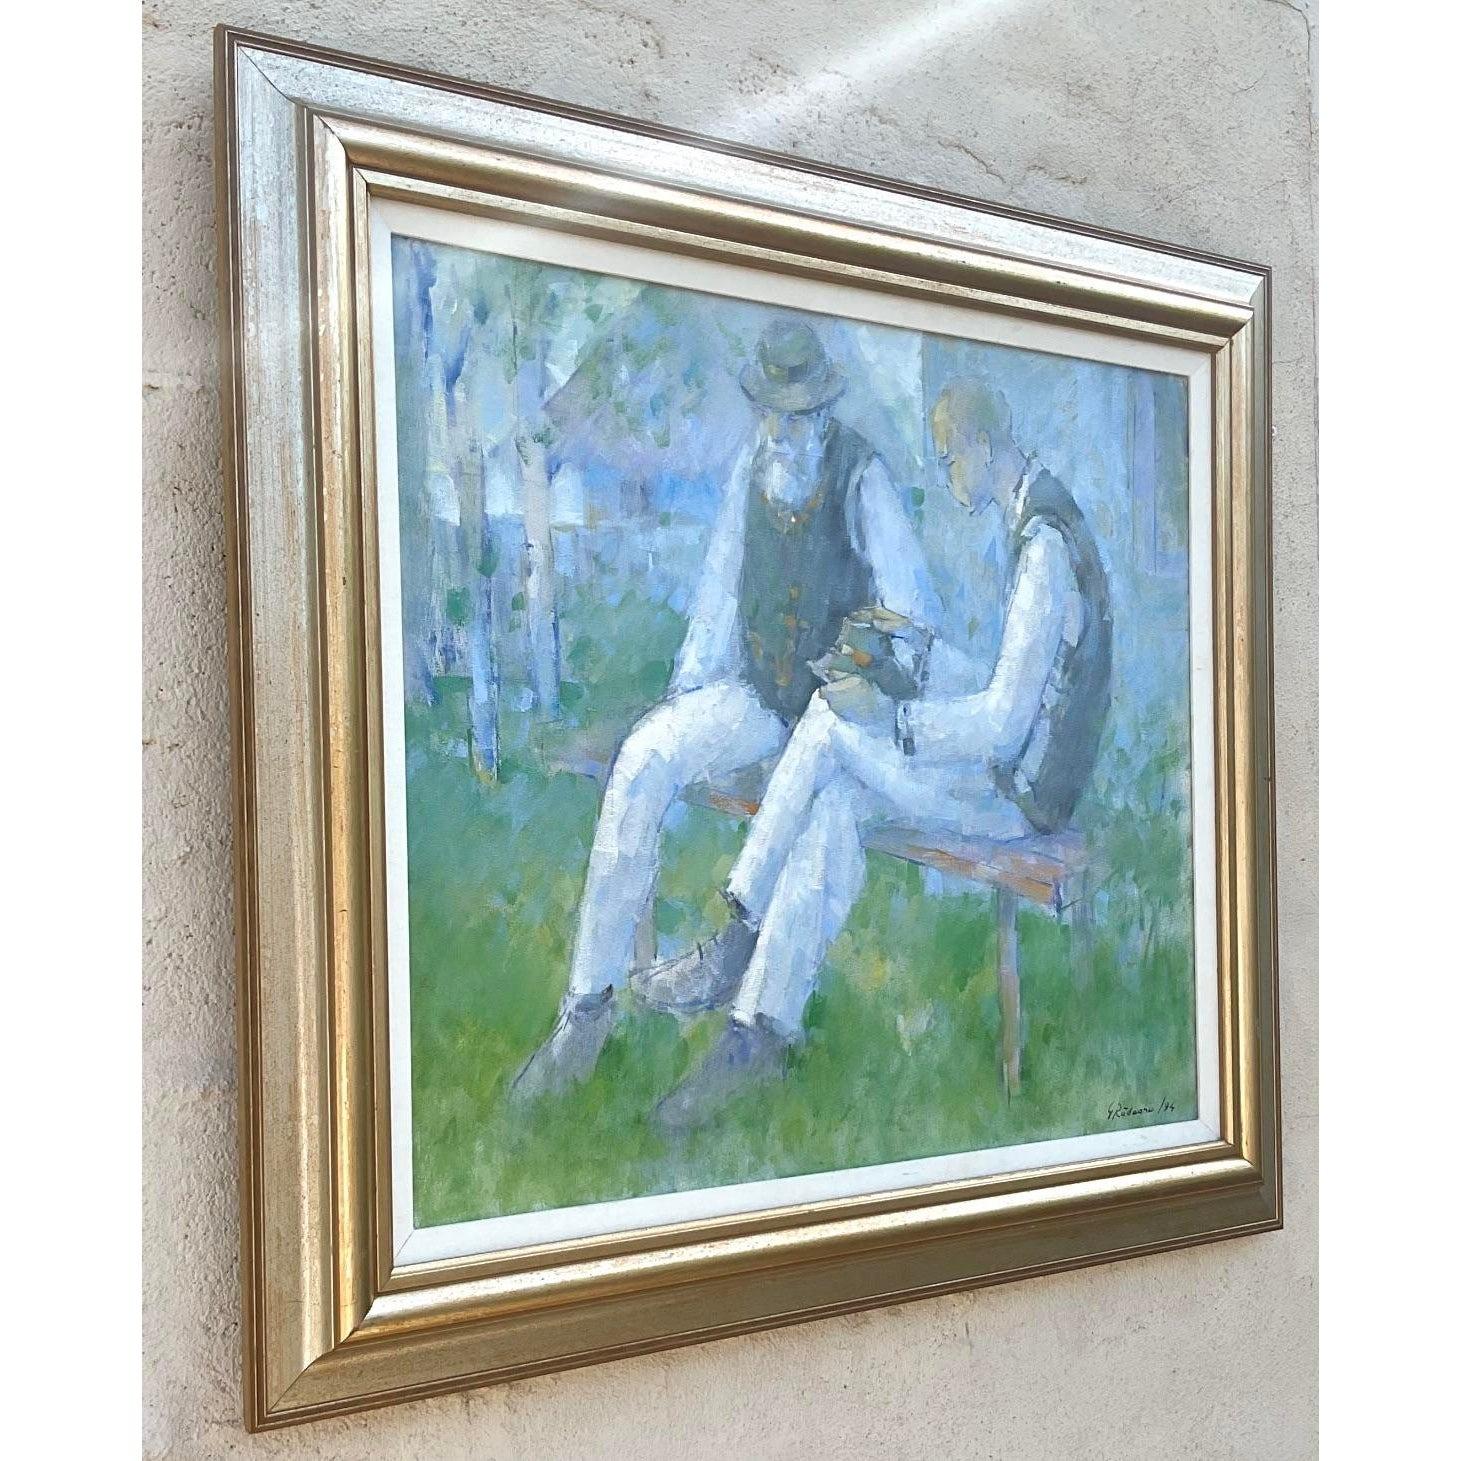 A fantastic vintage Boho original oil painting. A serene Figural composition of two men. Beautiful soothing colors. Signed by the artist. Acquired from a Palm Beach estate.